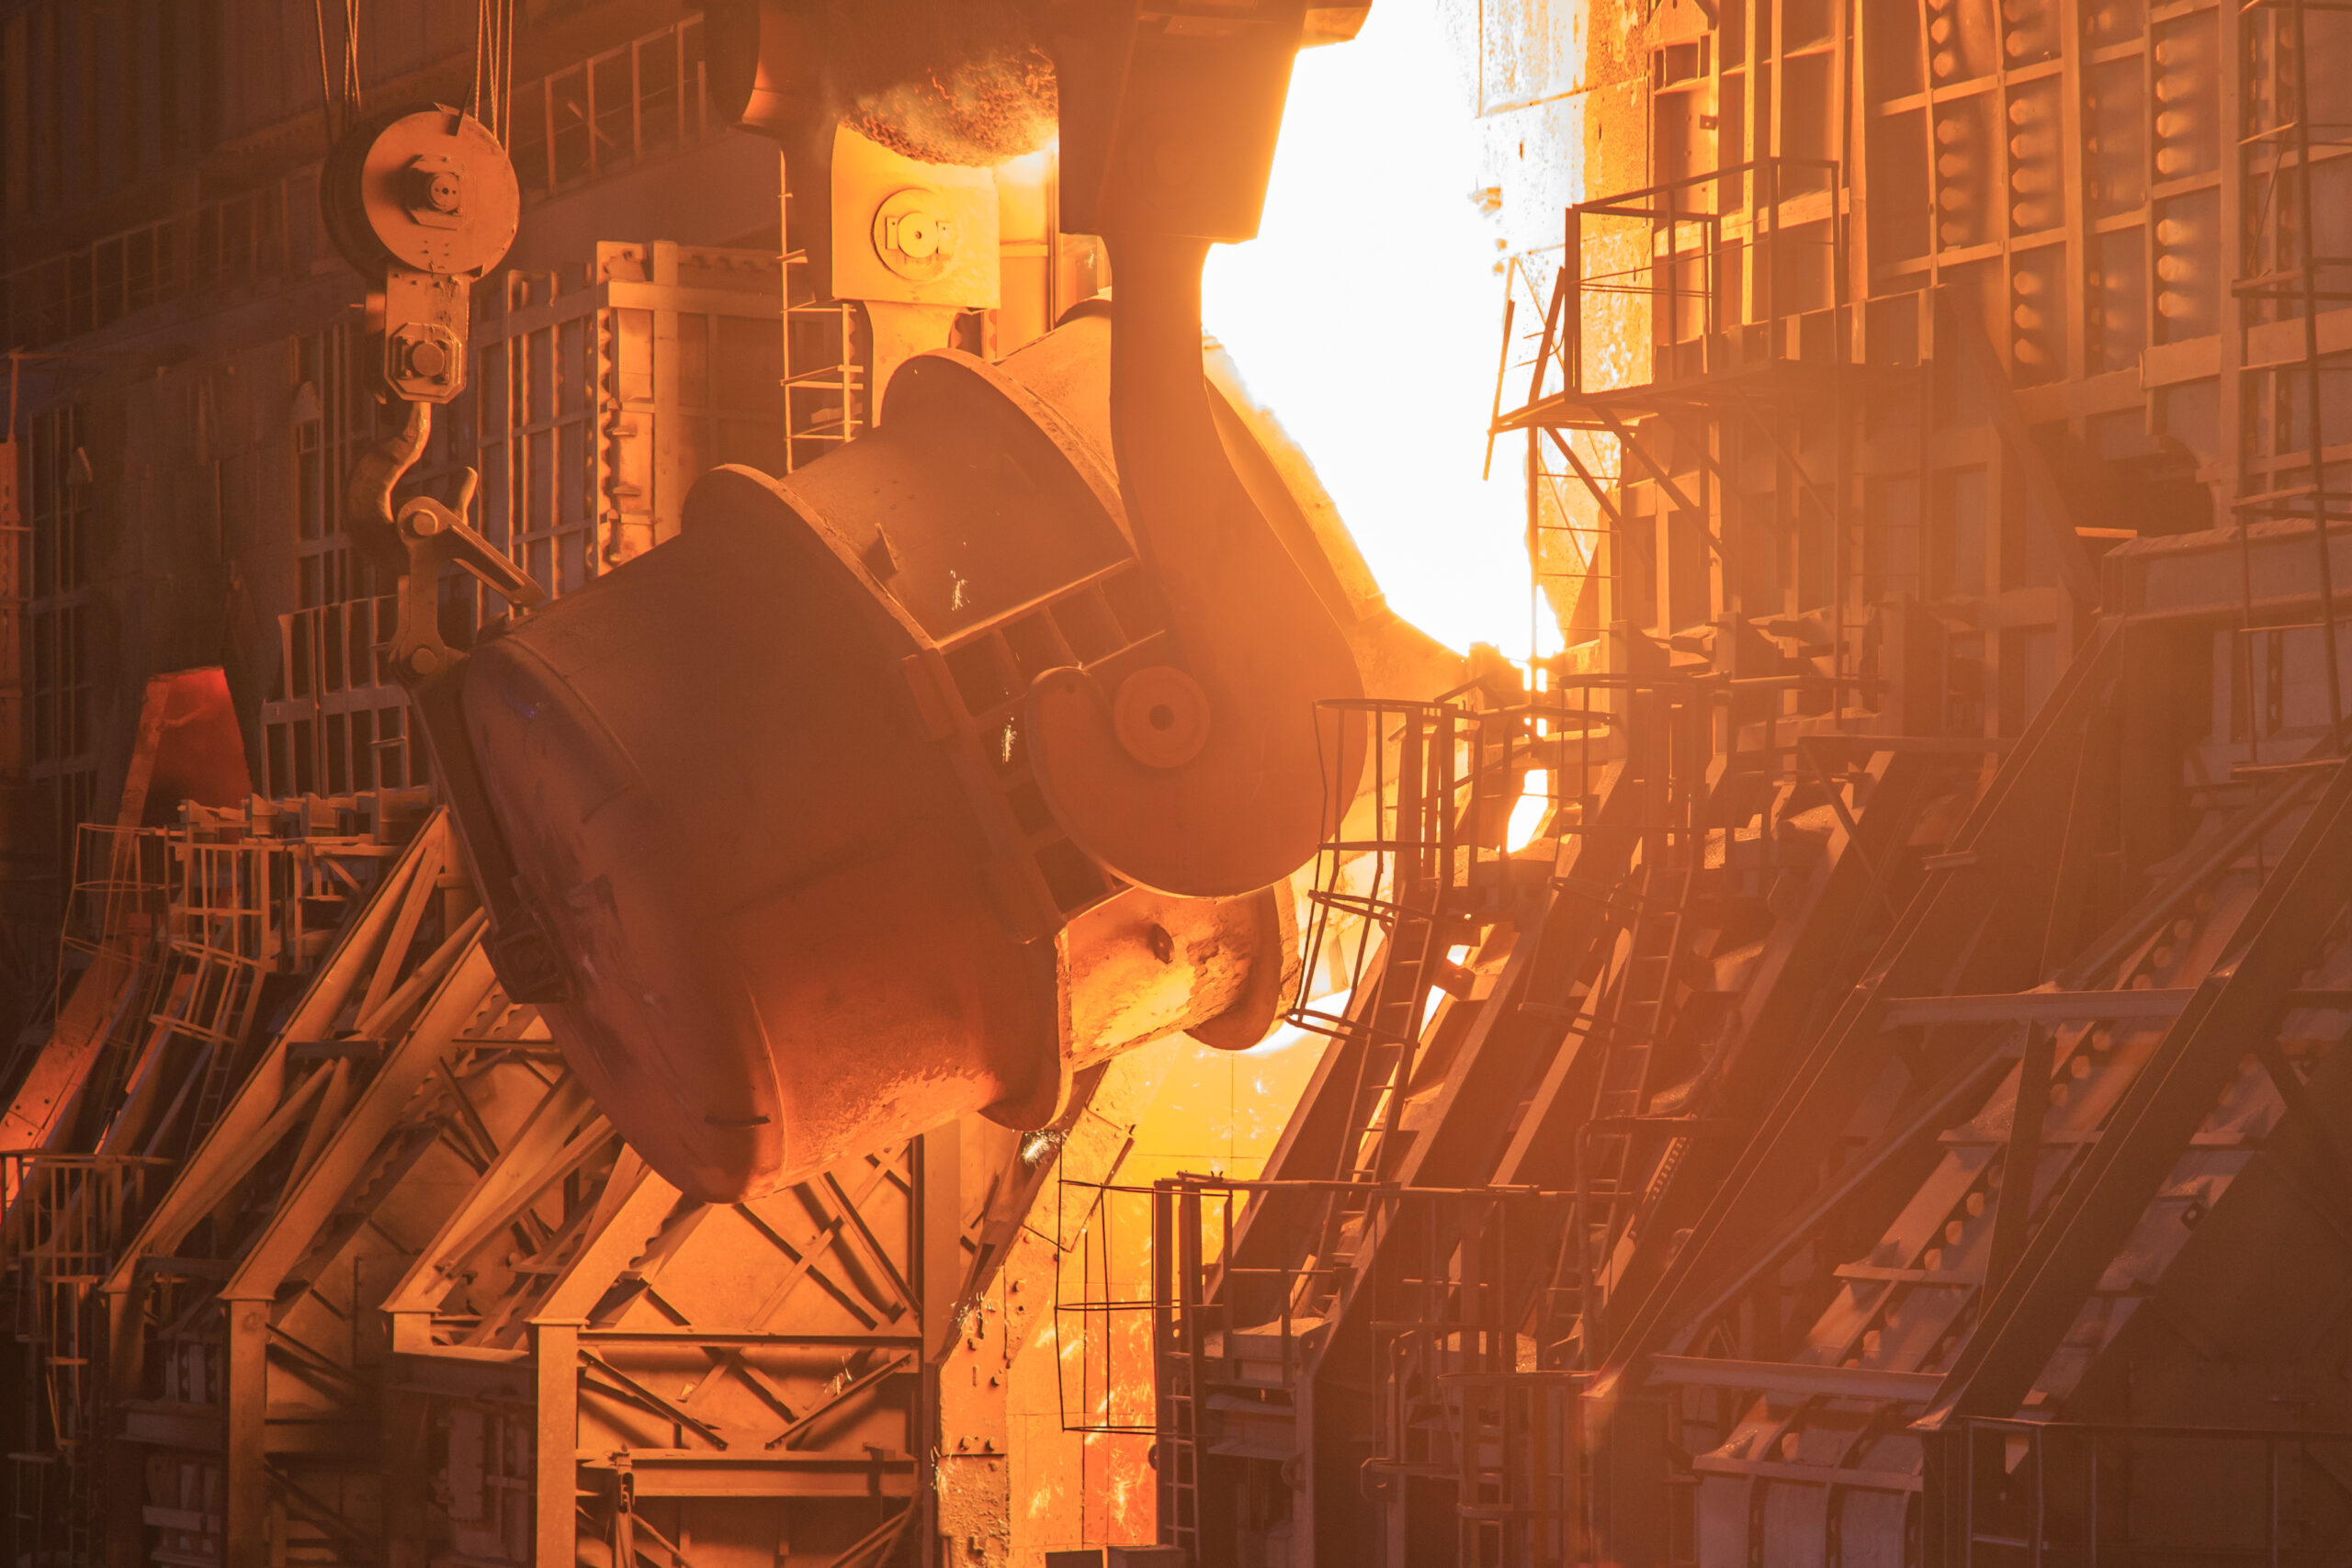 At a steel production process utilizing basic oxygen furnaces, a tank pours molten steel into forms.